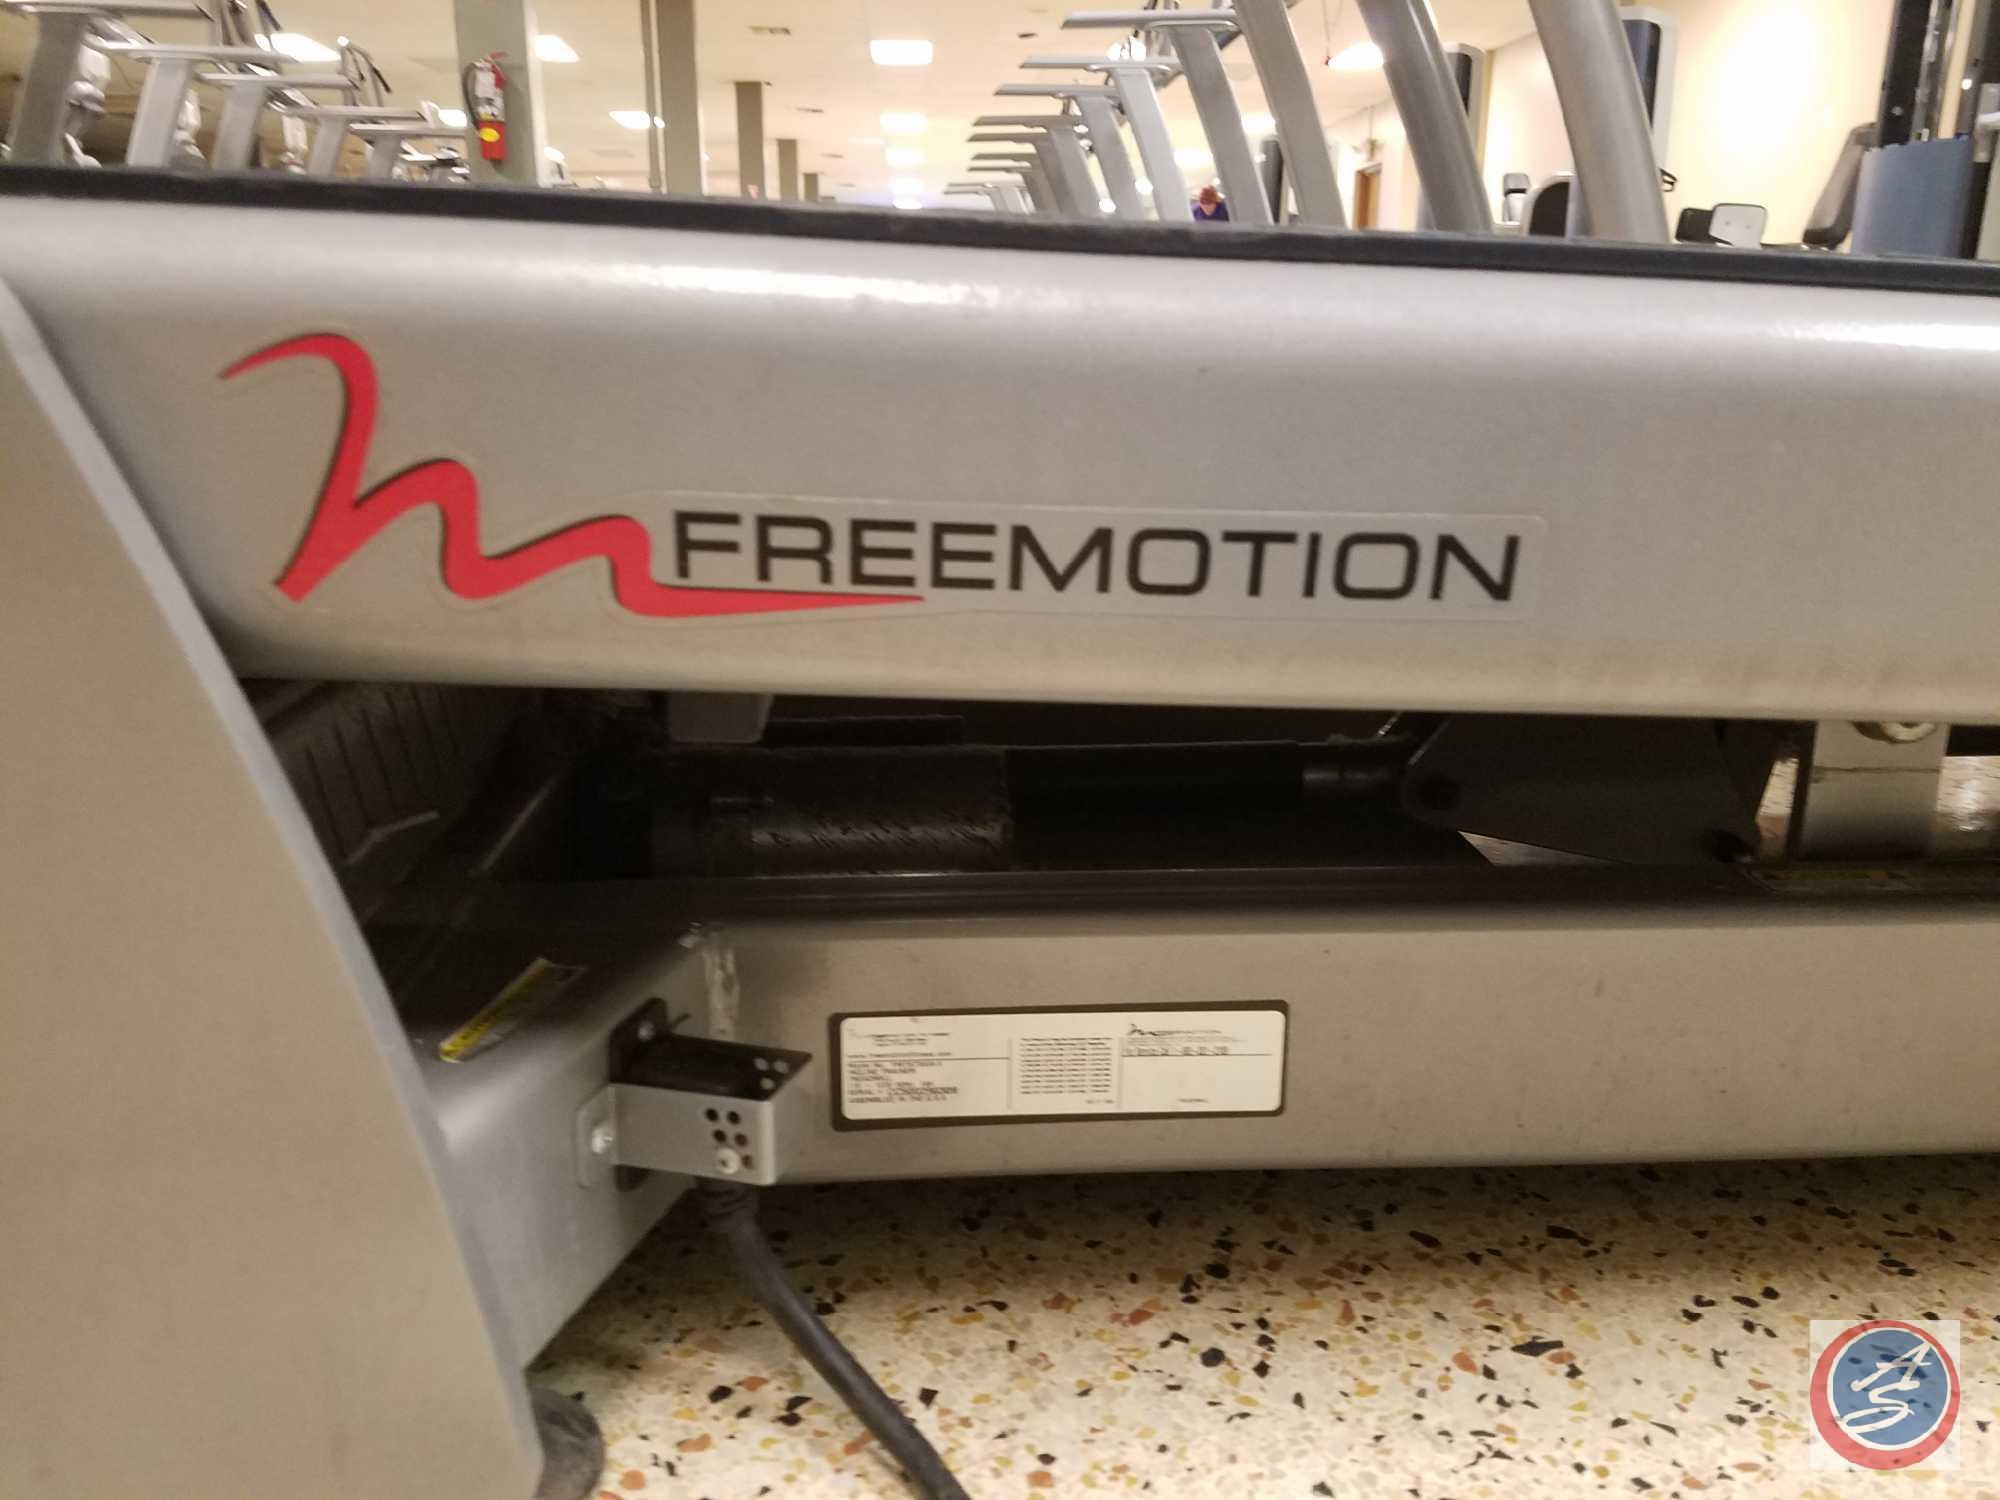 FreeMotion Commercial Incline Trainer w/ 12 in. TV Display Monitor (Model FMTK7506P.0) {{SCREEN DOES